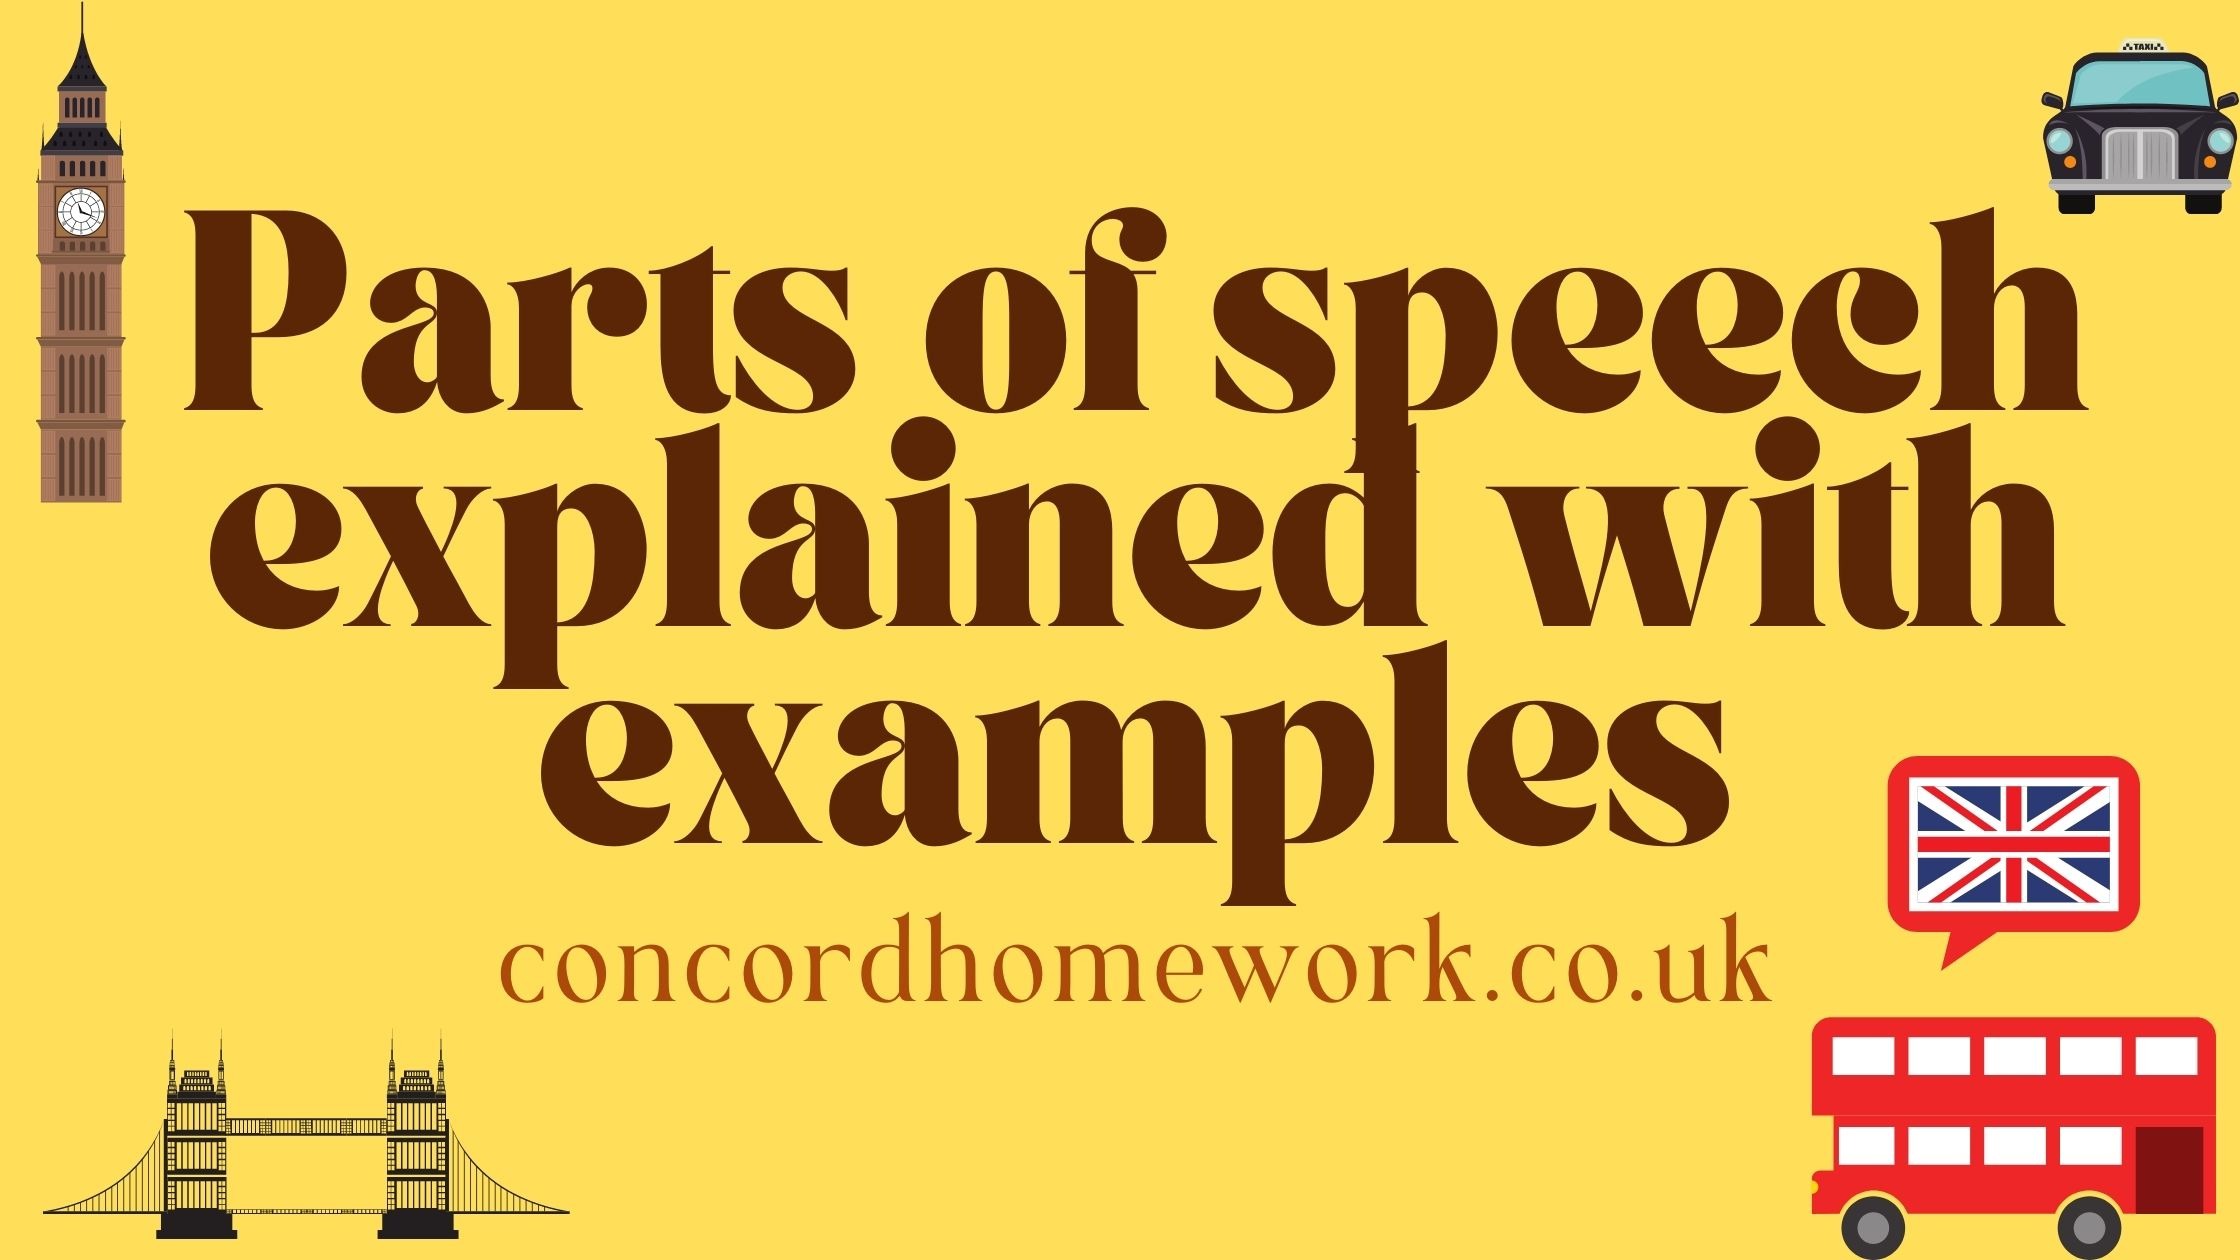 Parts of speech explained with examples